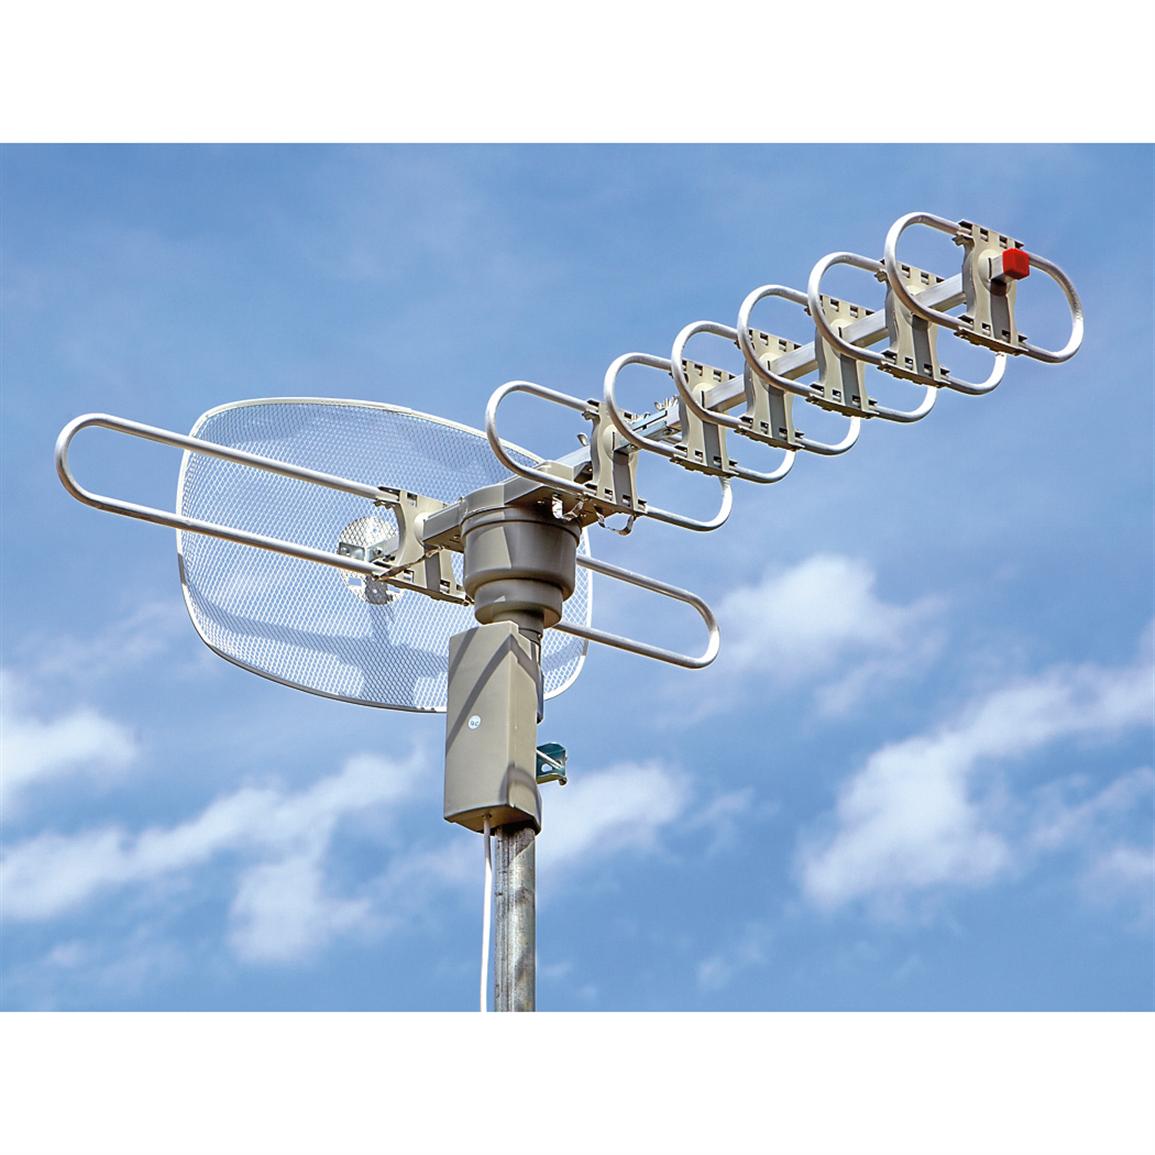 Elite Hdtv Outdoor Antenna With Remote 224813 At Sportsman S Guide